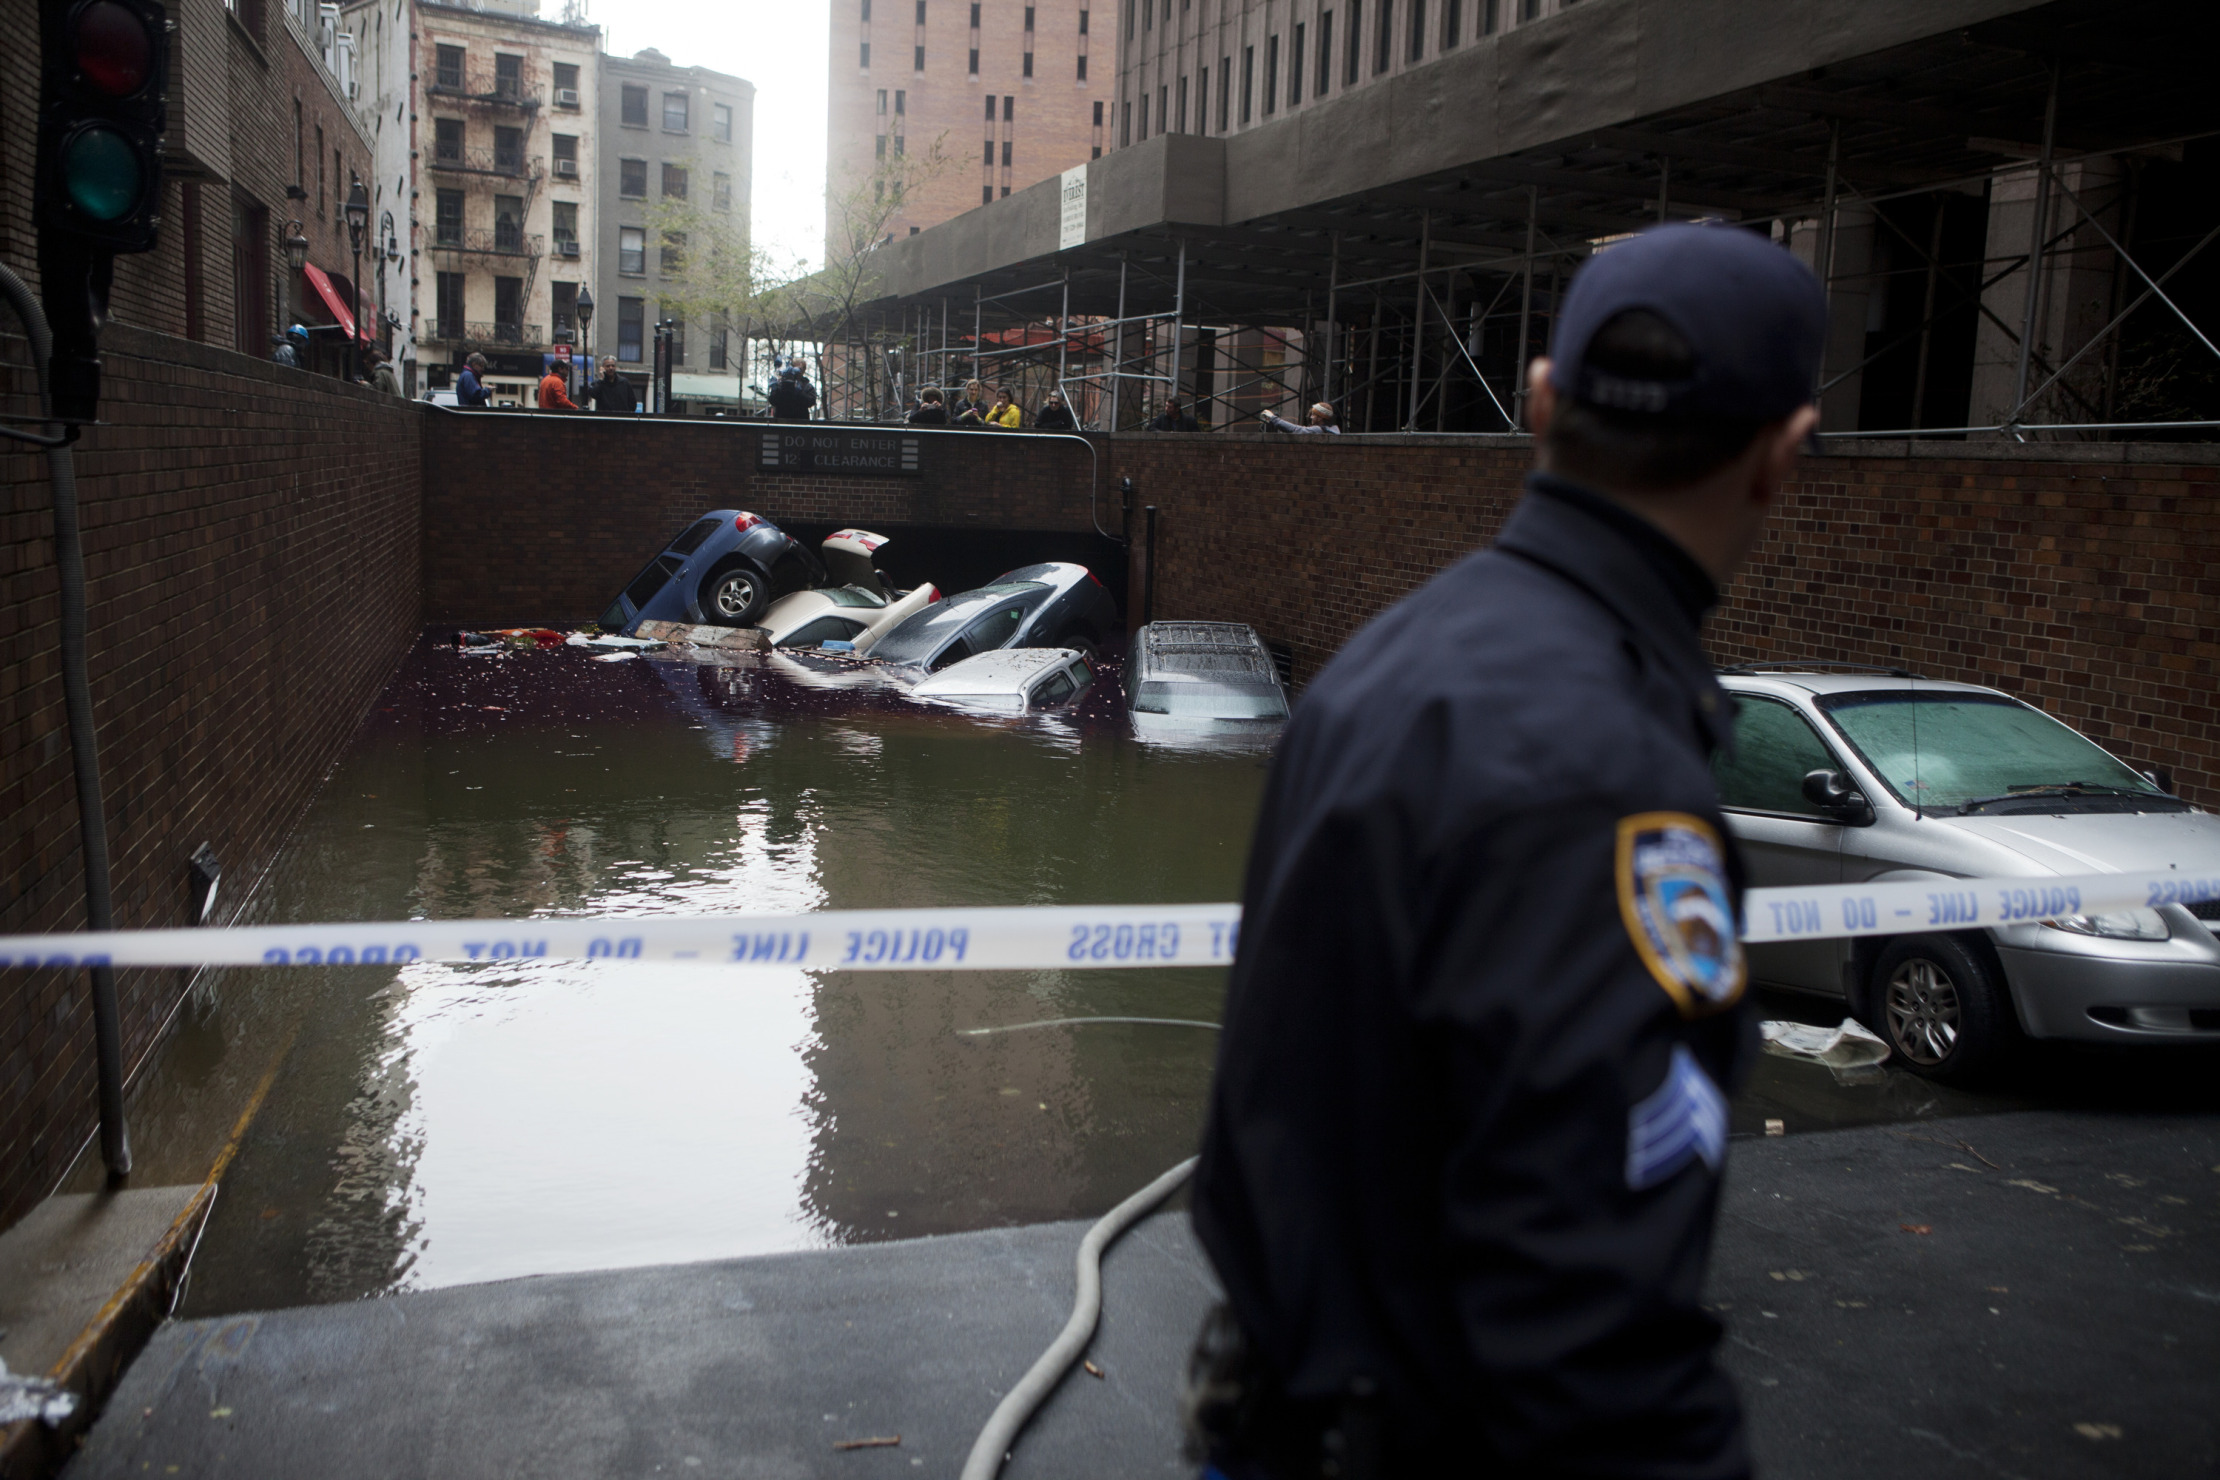 Vehicles submerged in water in the Financial District of New York in 2012.